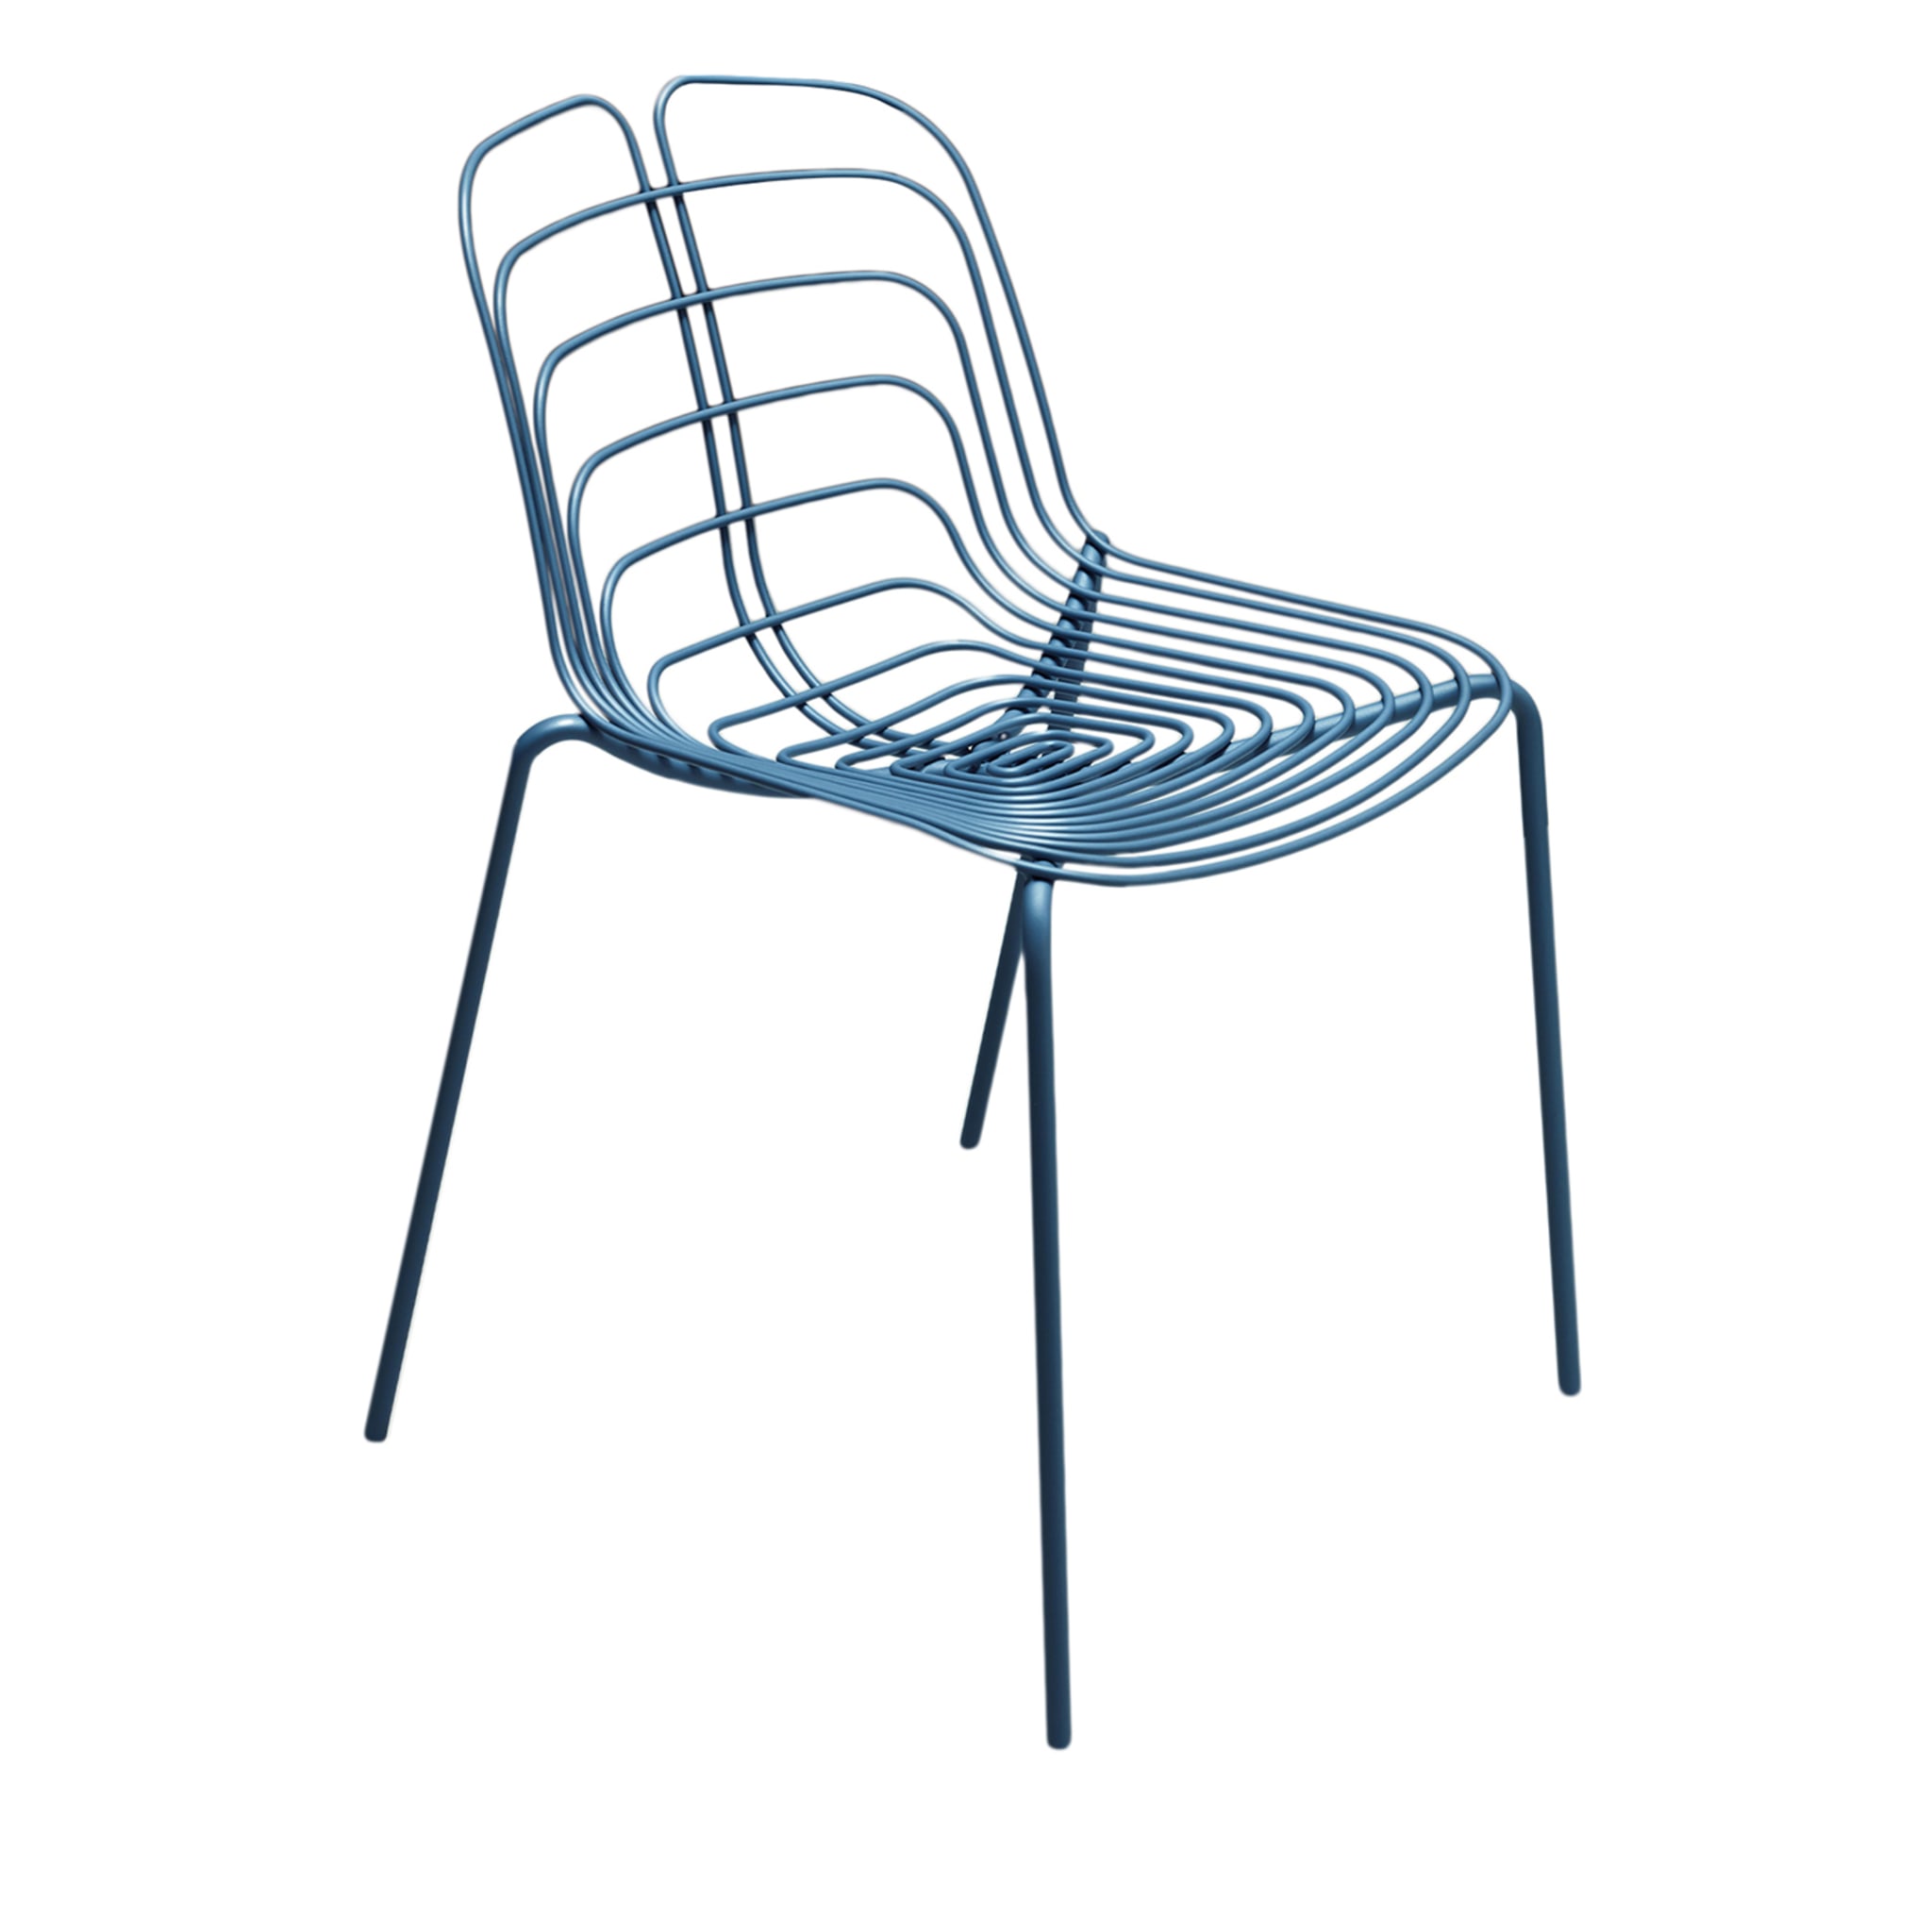 Wired Outdoor Chair by Micheal Young - Main view